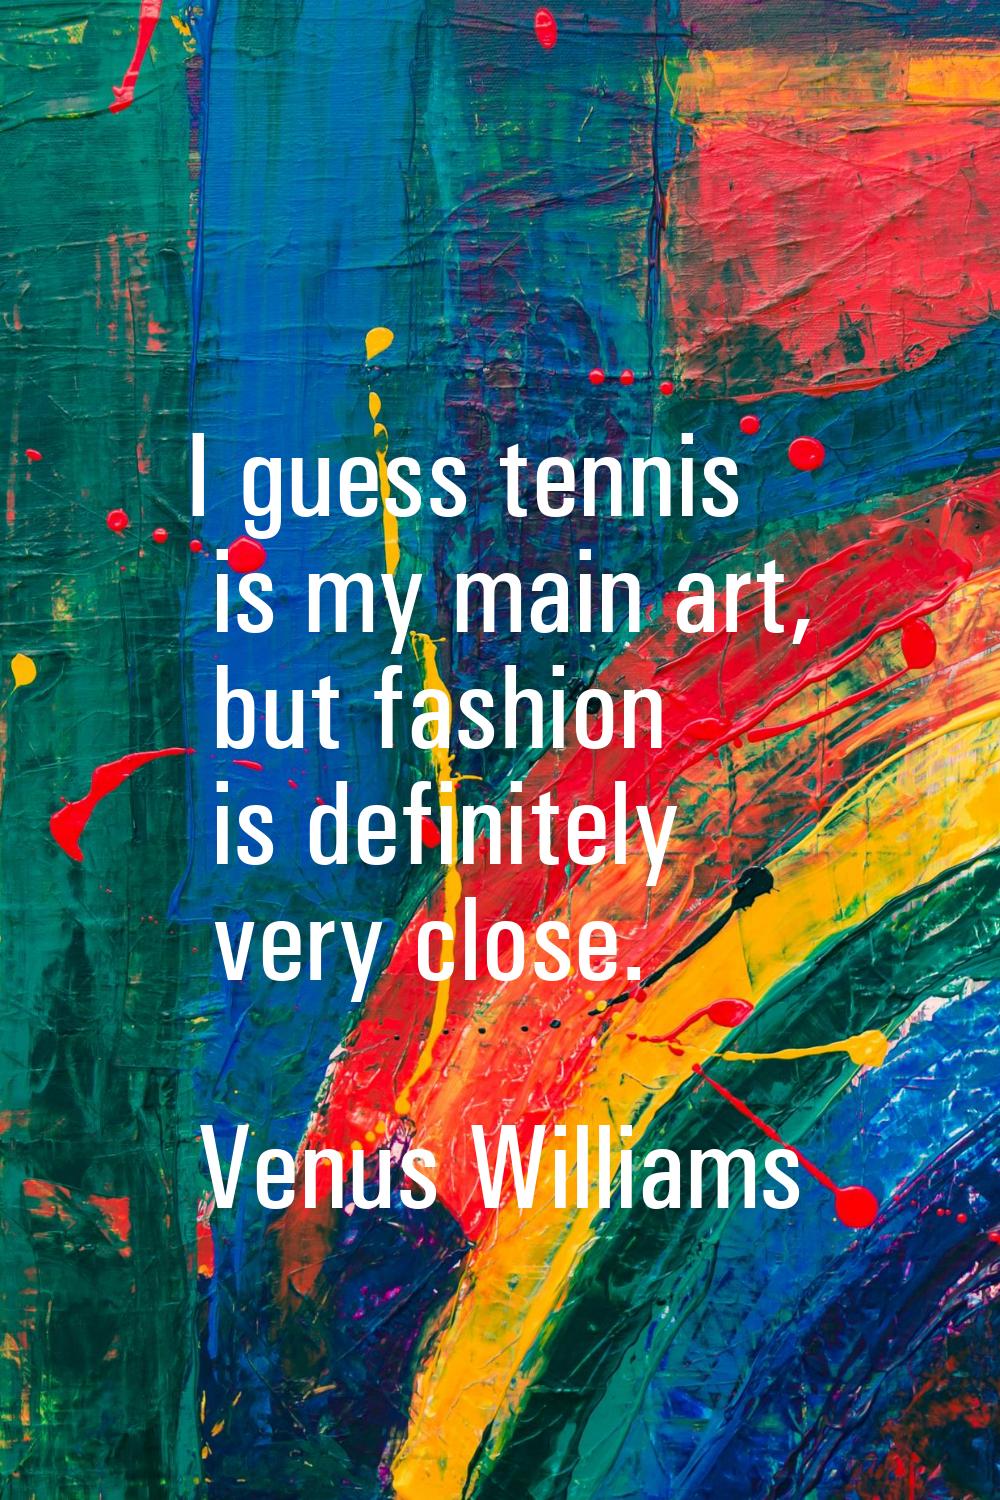 I guess tennis is my main art, but fashion is definitely very close.